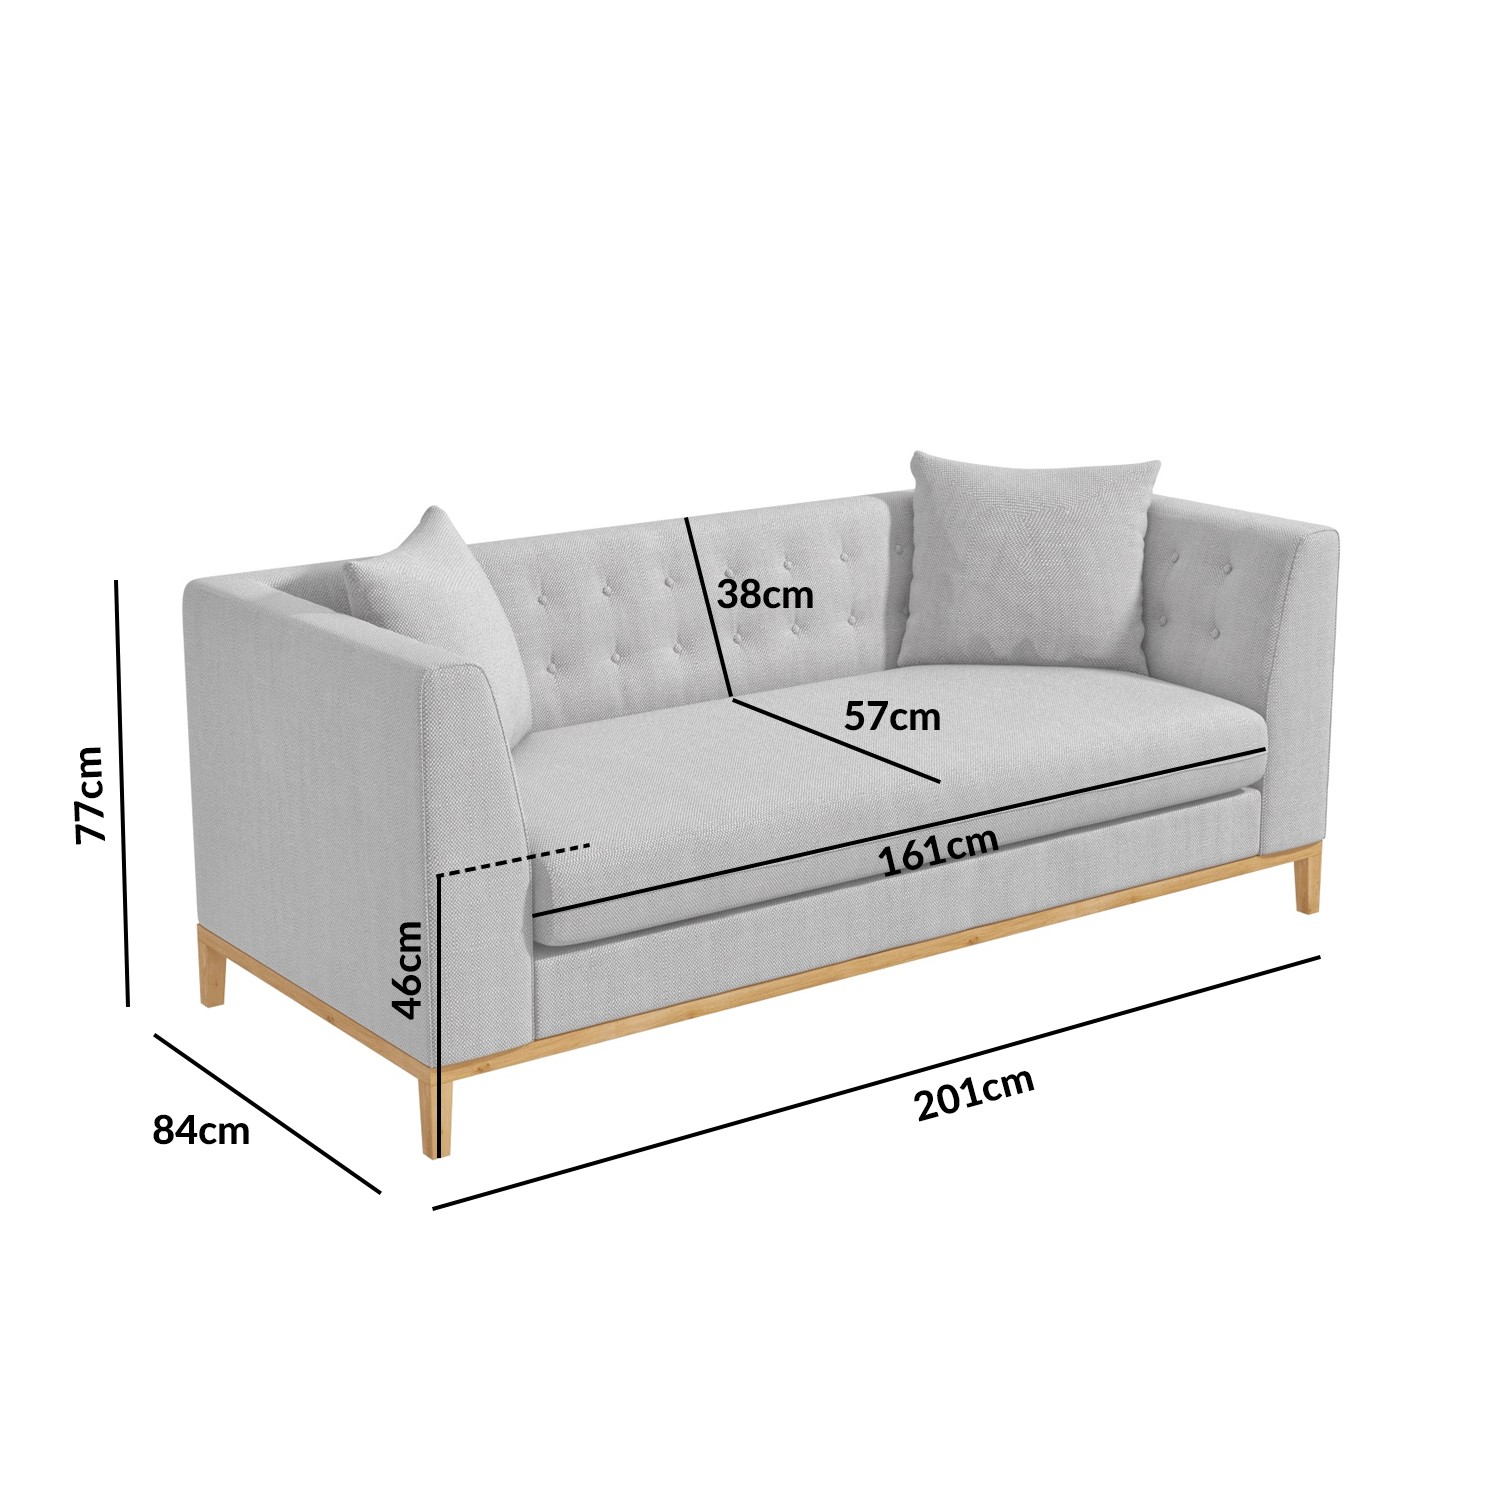 3 Seater Sofa Length, How Big Is A 3 Seater Sofa